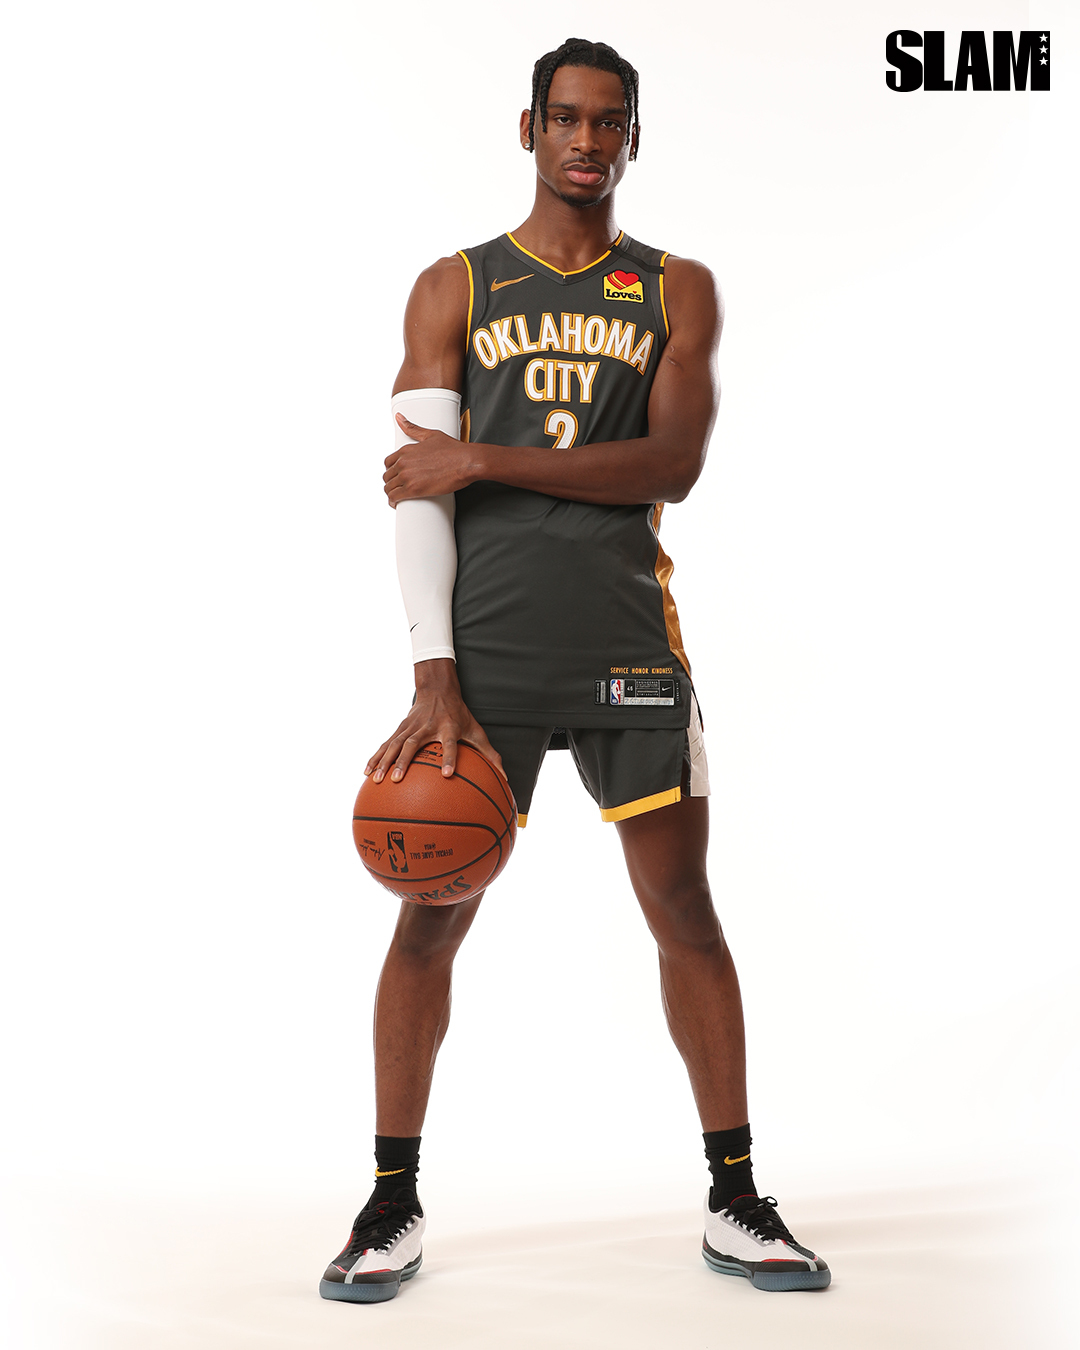 Shai Gilgeous-Alexander Signs With Converse - Boomtown Hoops